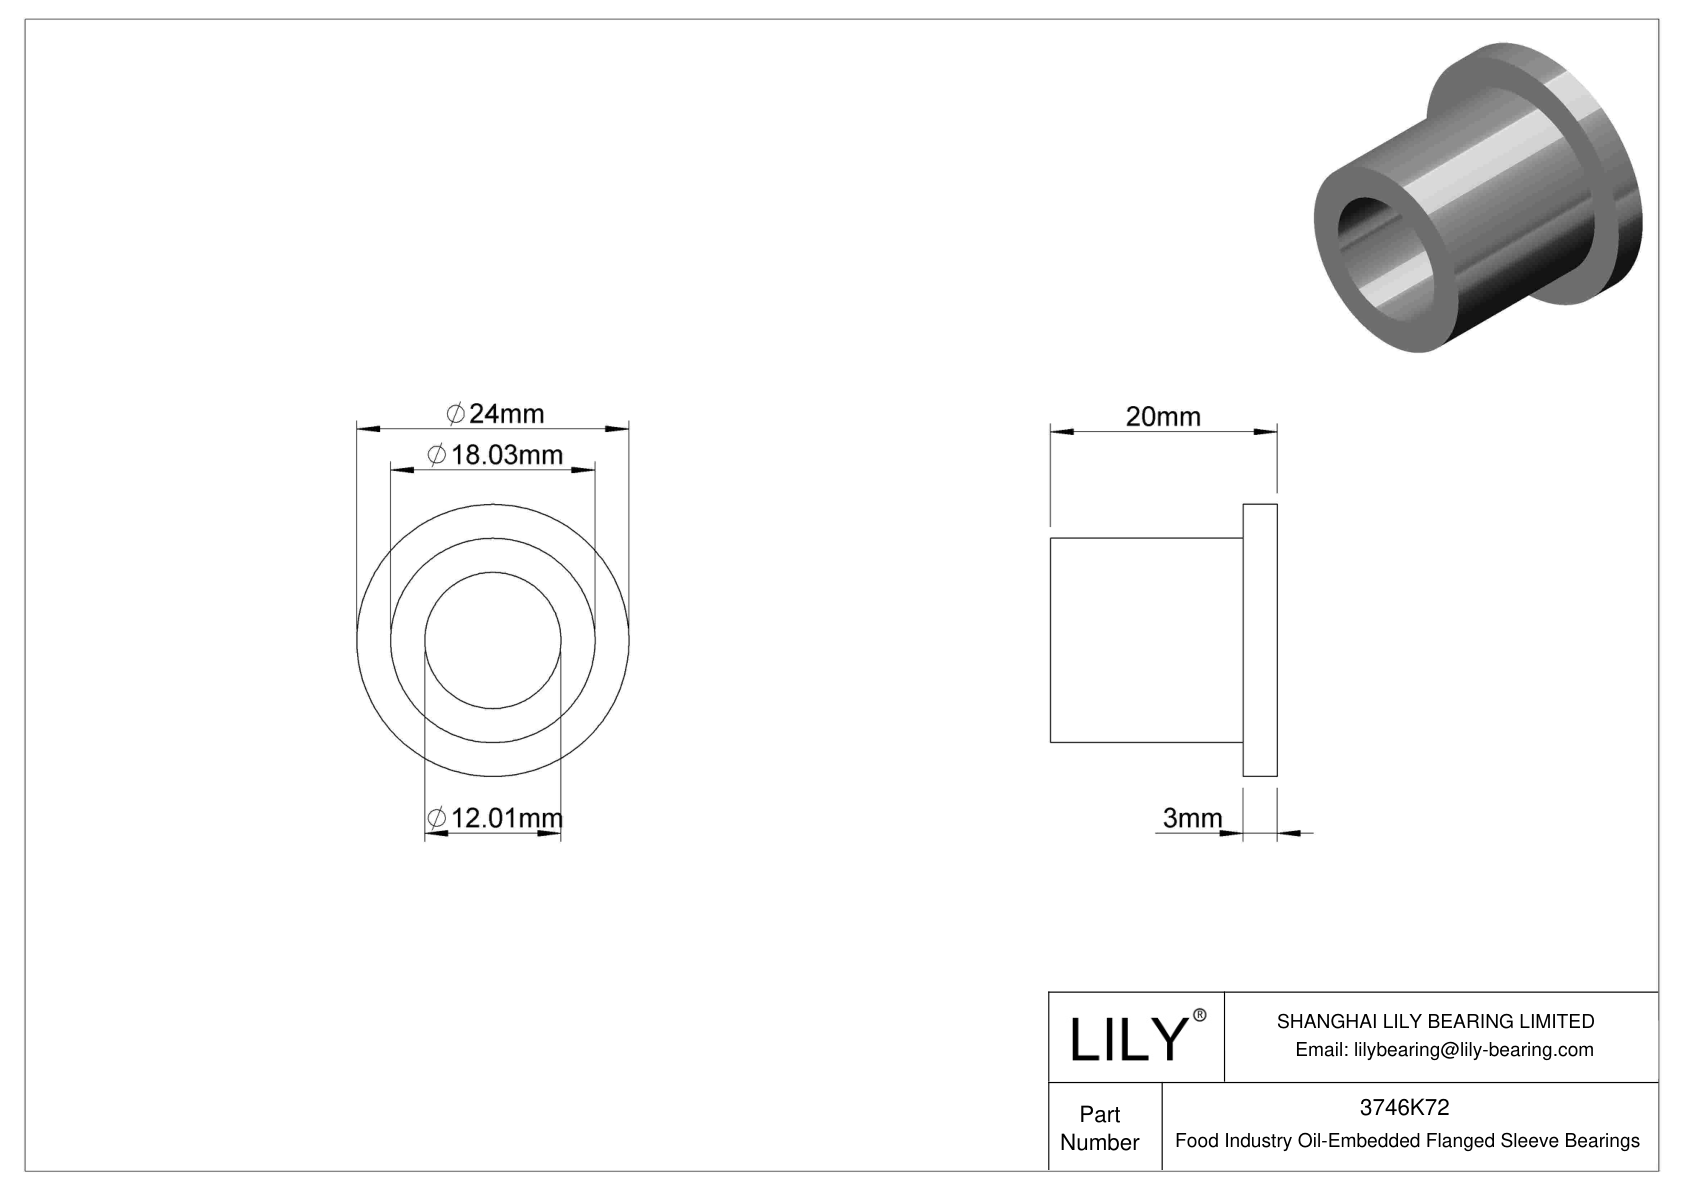 DHEGKHC Food Industry Oil-Embedded Flanged Sleeve Bearings cad drawing